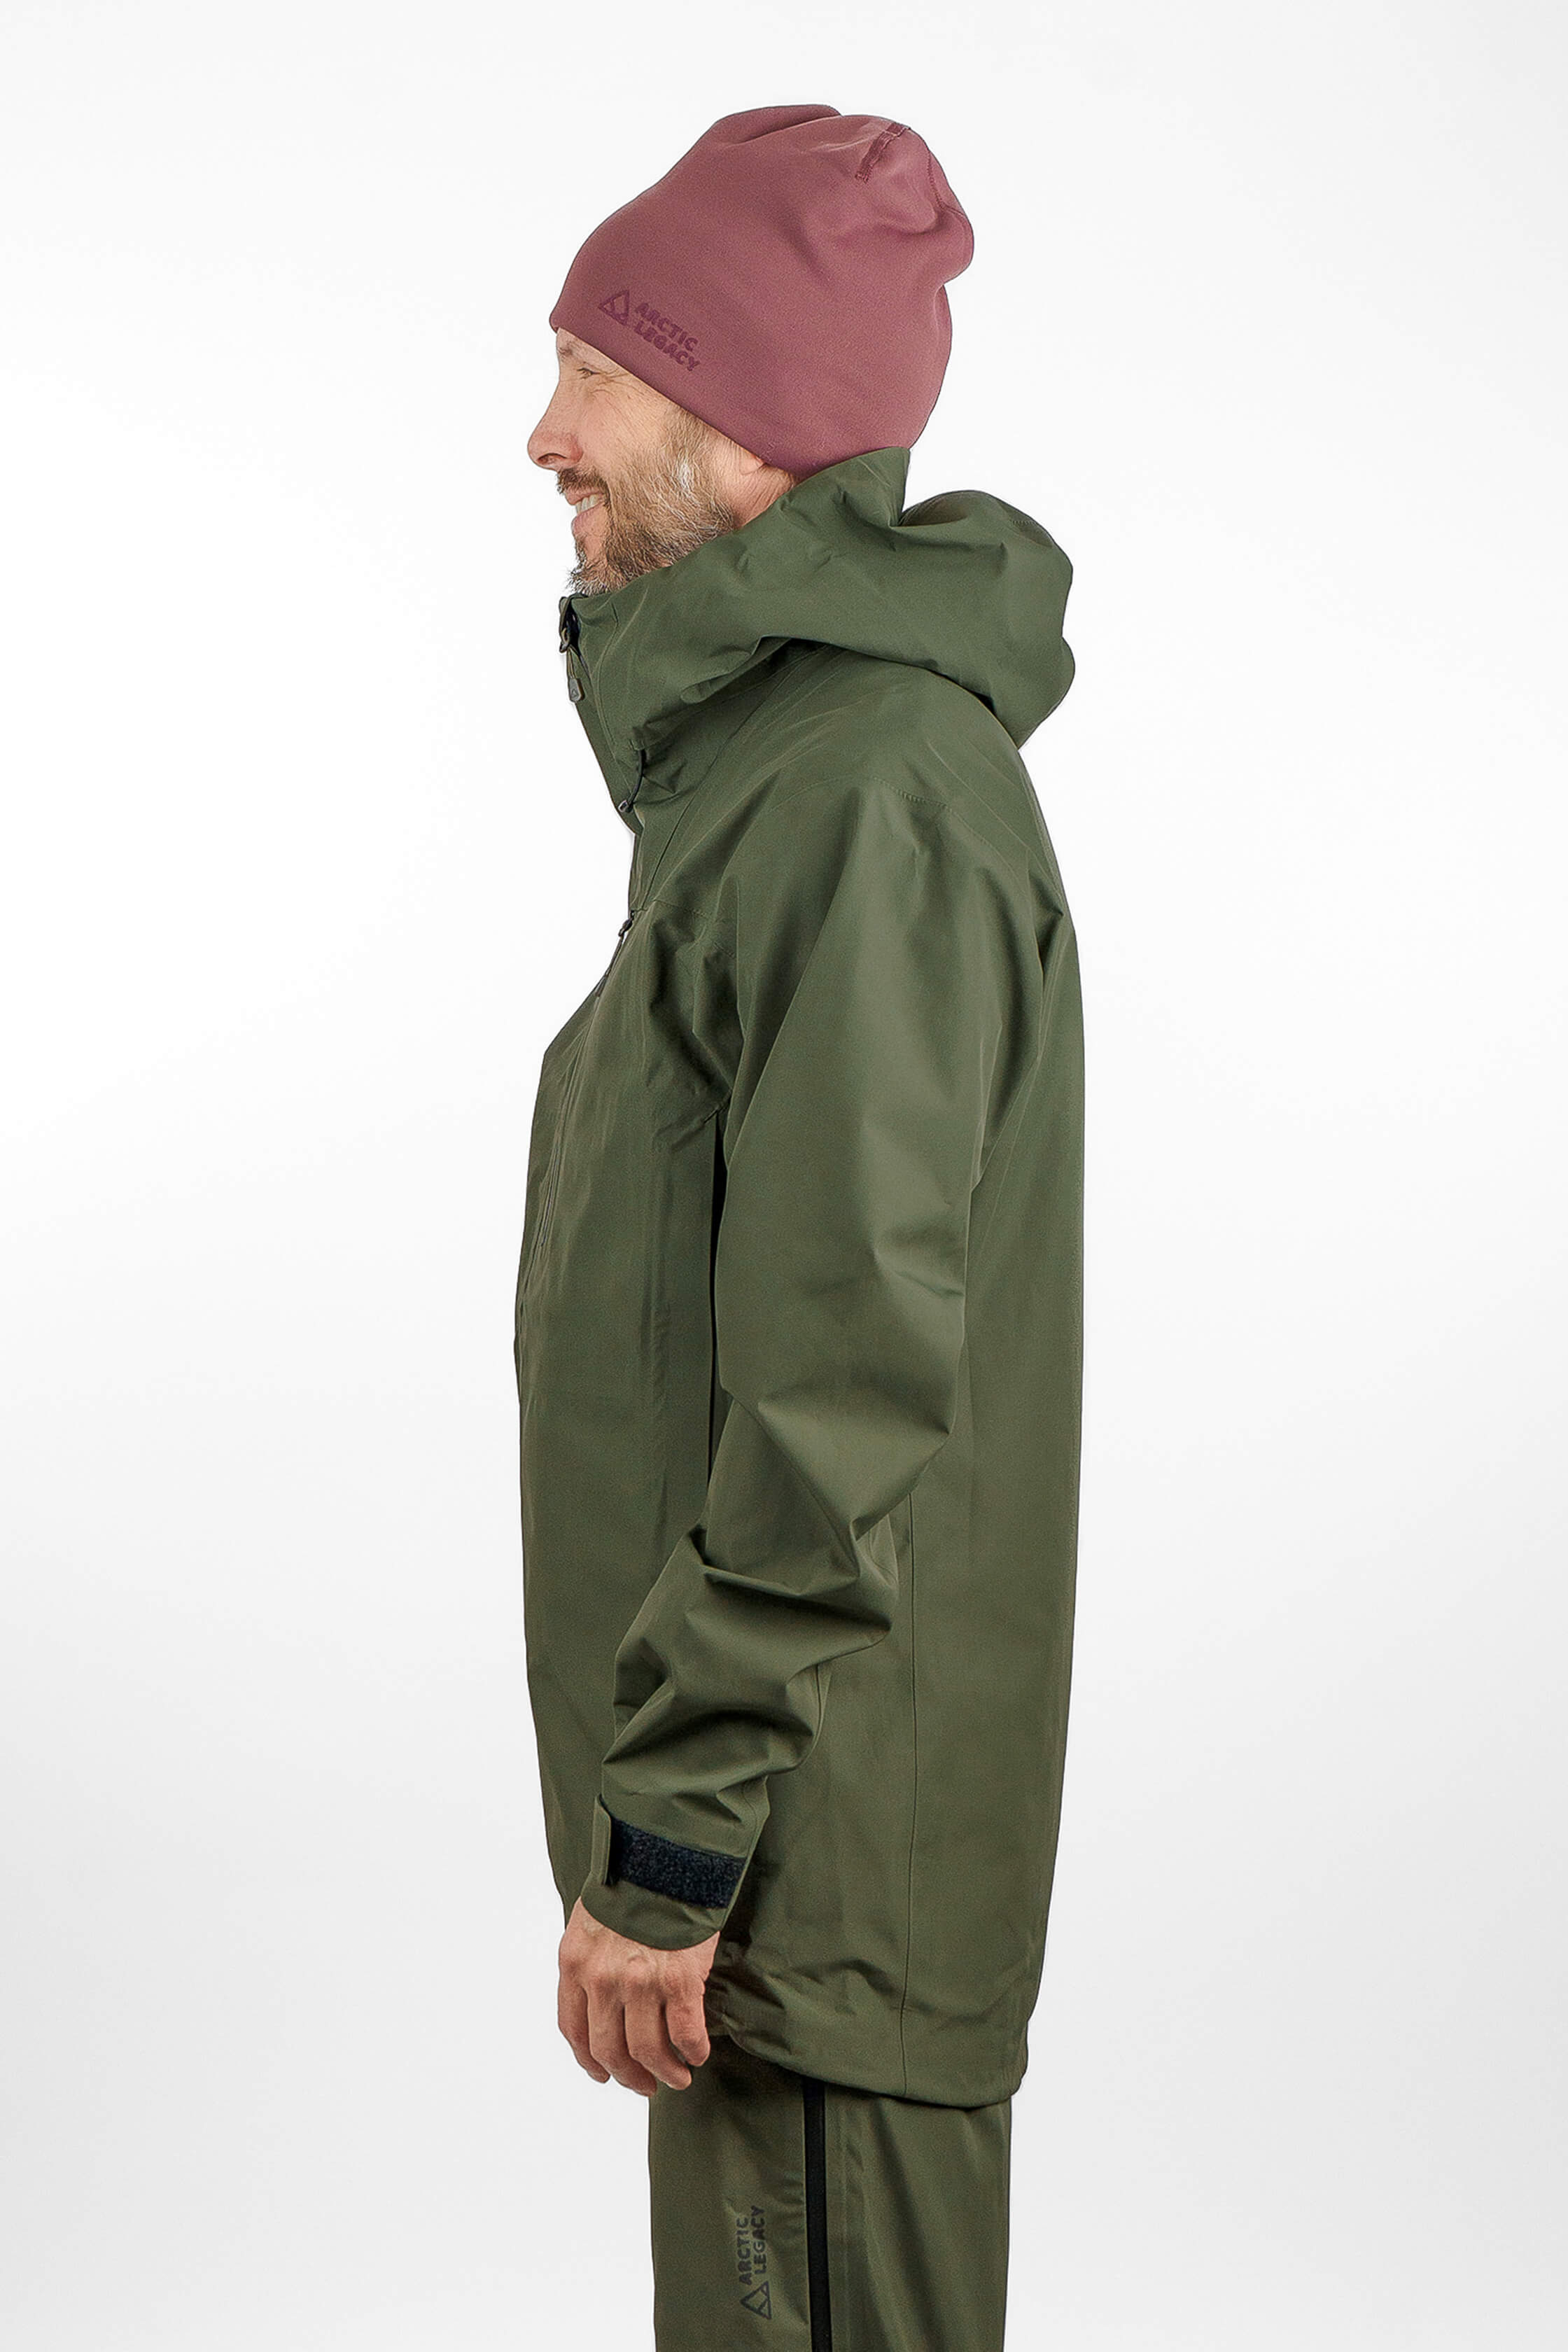 Green hardshell jacket in unisex sizing - side view of the Arctic Legacy Nuka Elements 3 layer Jacket#color_dusty-olive